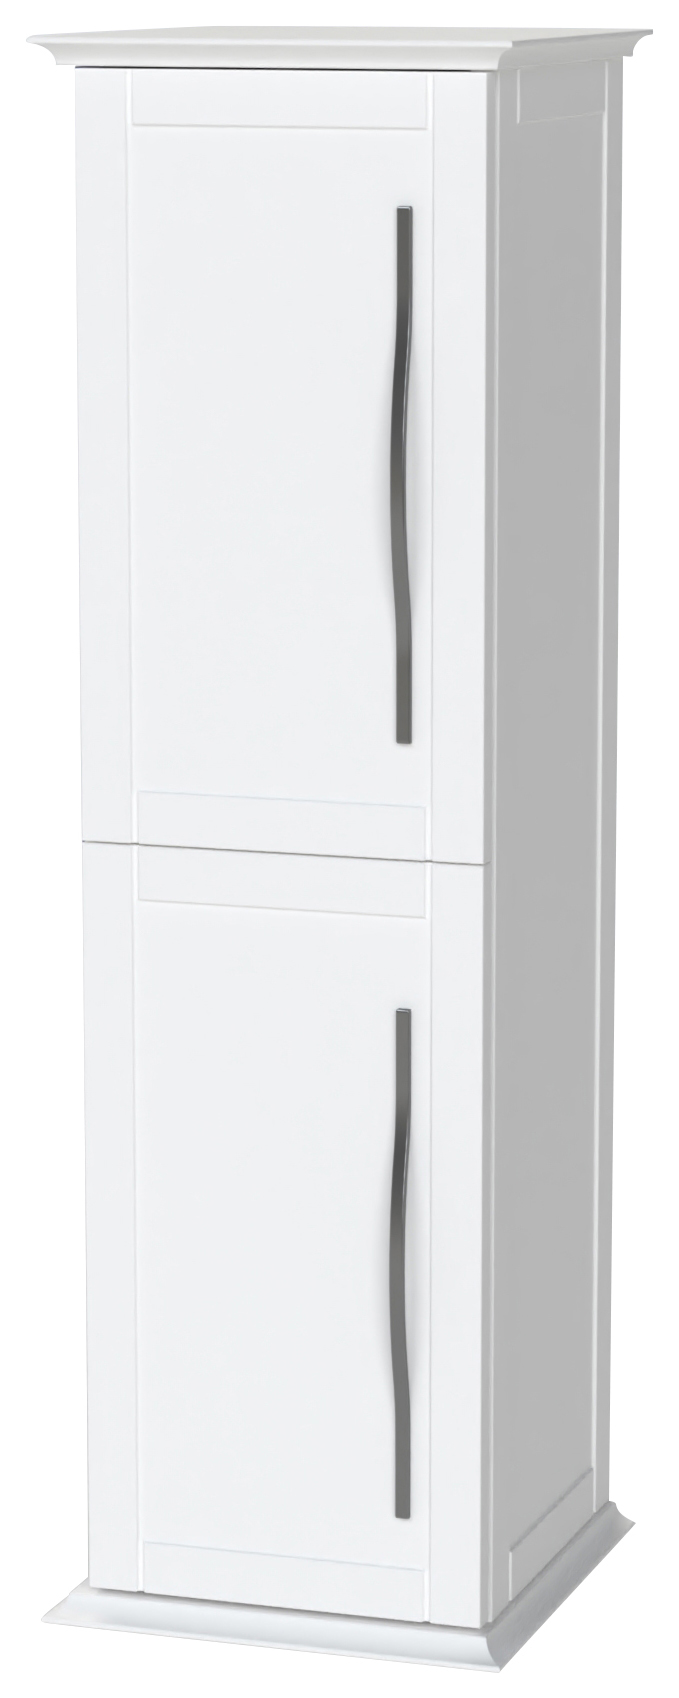 Duarti by Calypso Kentchurch Glacier White Wall Hung Tower with Chrome Handles - 340mm